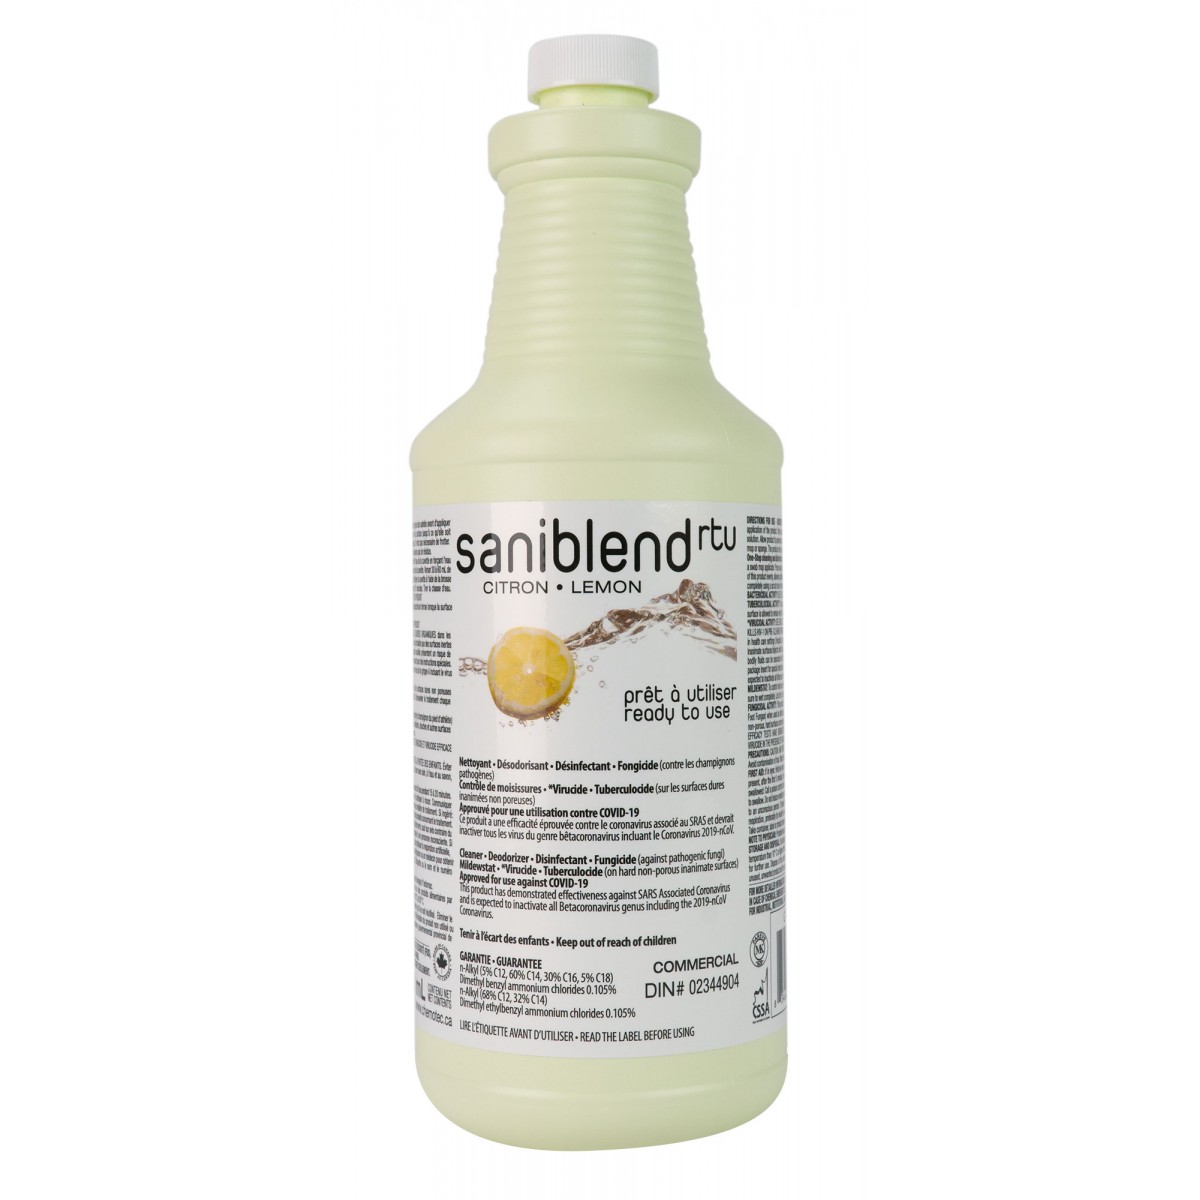 SANIBLEND RTU Ready to Use Disinfectant and Sanitizer, Lemon scent - 12 x 950ml - Case